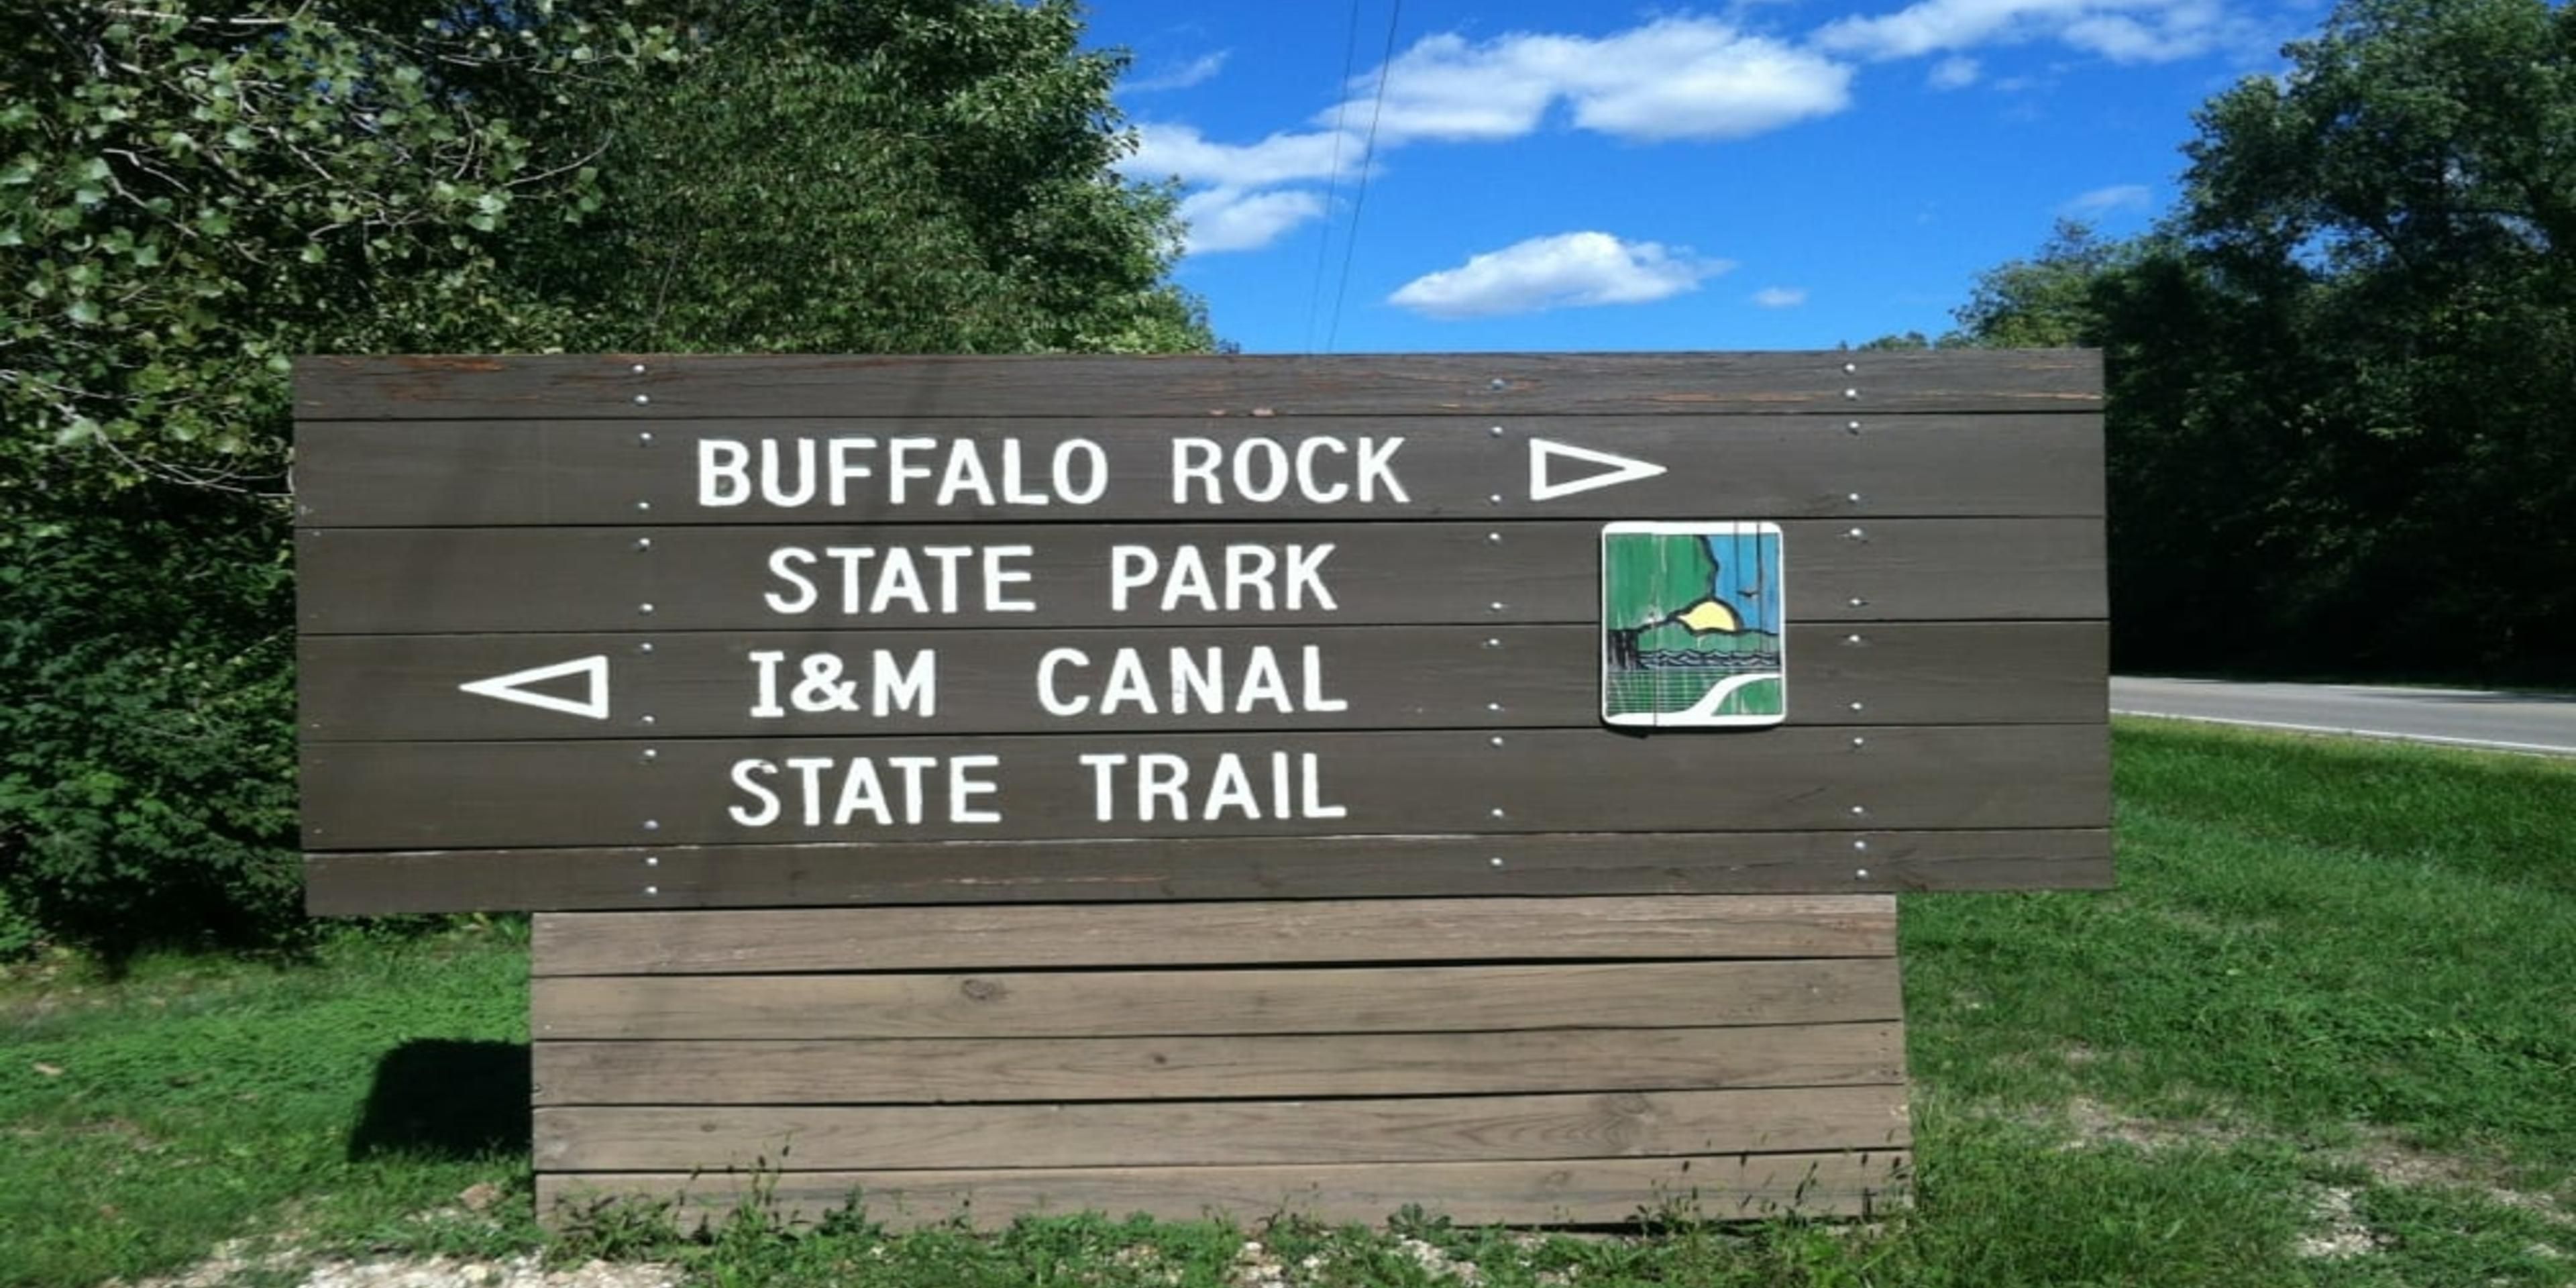 Buffalo Rock State Park is located on a bluff which once was an island in the Illinois River. Now standing majestically on the north bank, this promontory affords a magnificent, sweeping view of the Illinois River. Located approximately 3 miles west of Ottawa, this 298-acre park has long been a favorite picnic area, and a nature lovers' delight.